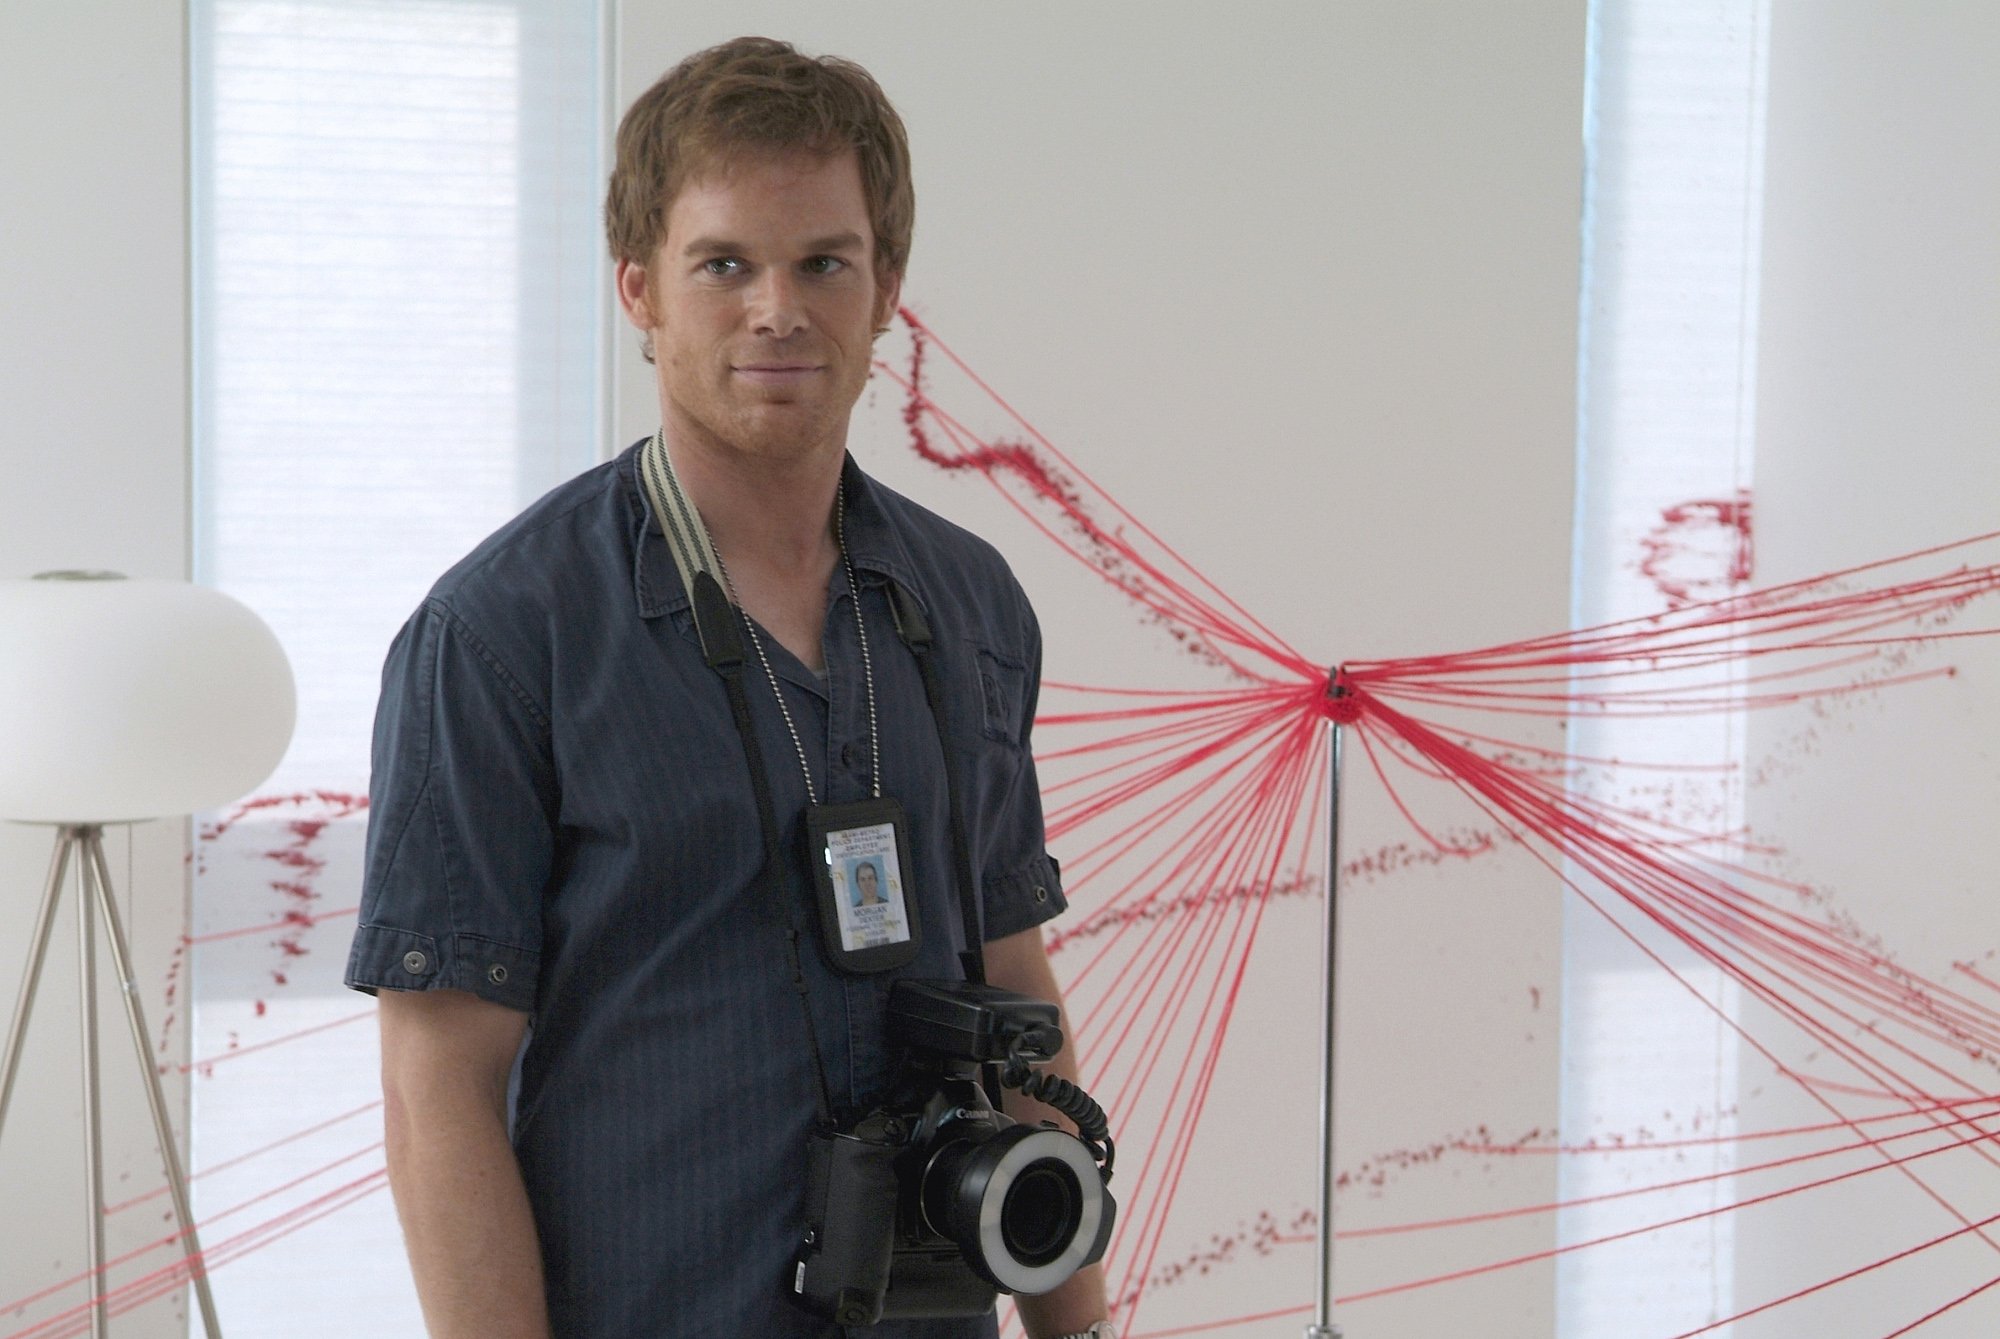 Michael C. Hall as Dexter Morgan in the pilot episode of Dexter. Dexter stands at a crime scene with red string everywhere and a camera around his neck.